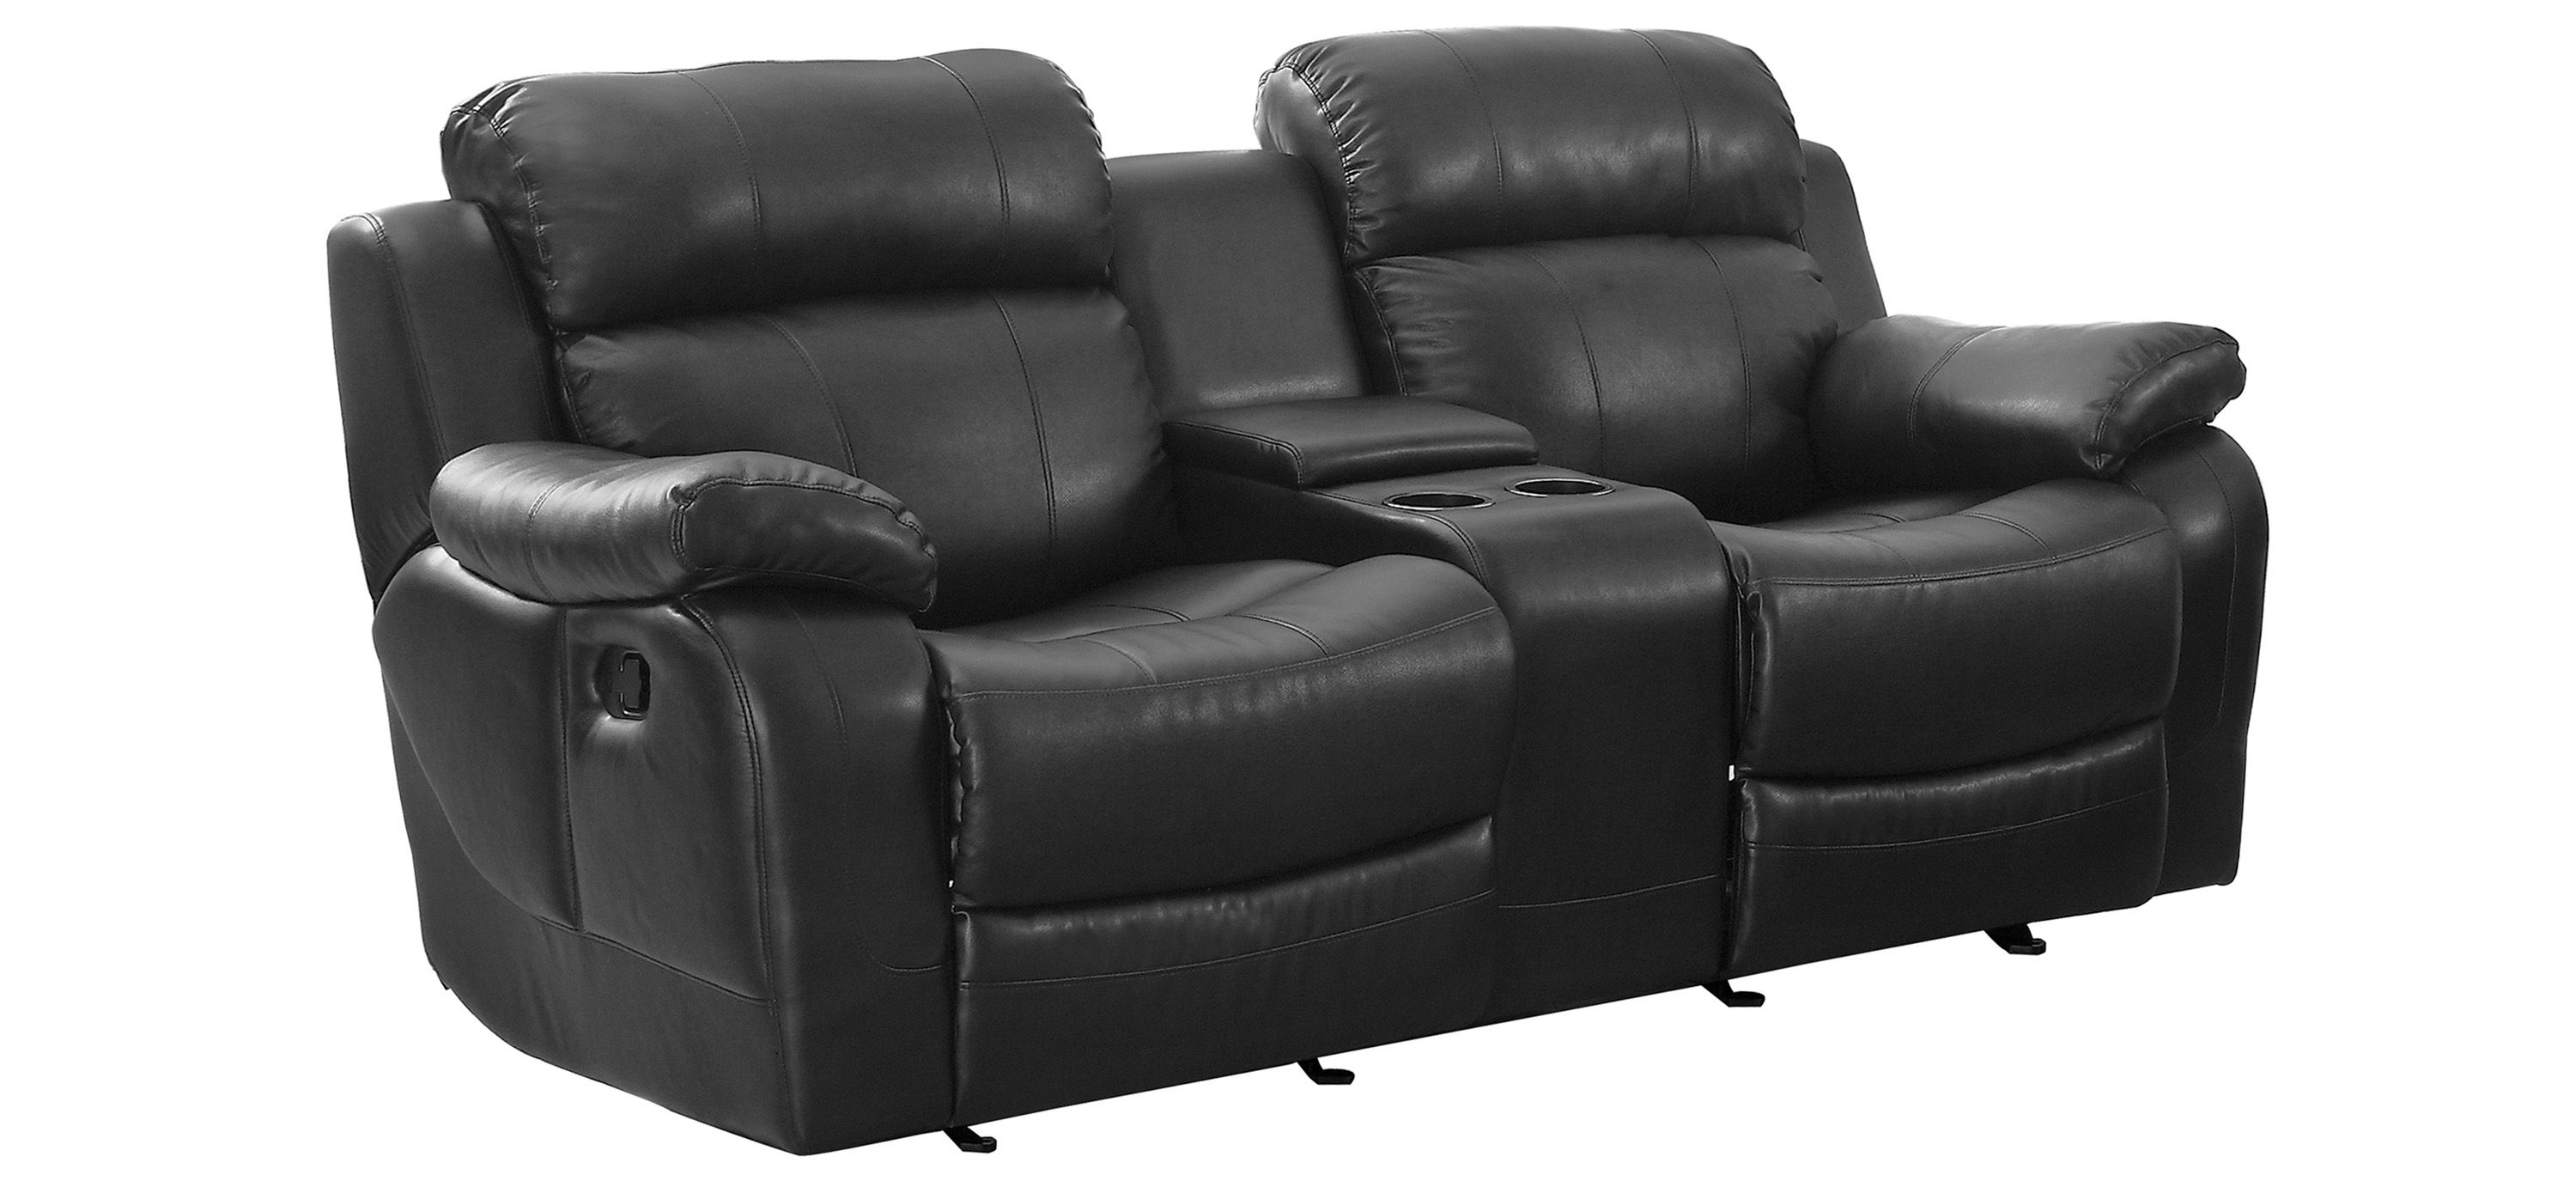 Dwyer Double Glider Reclining Love Seat with Center Console